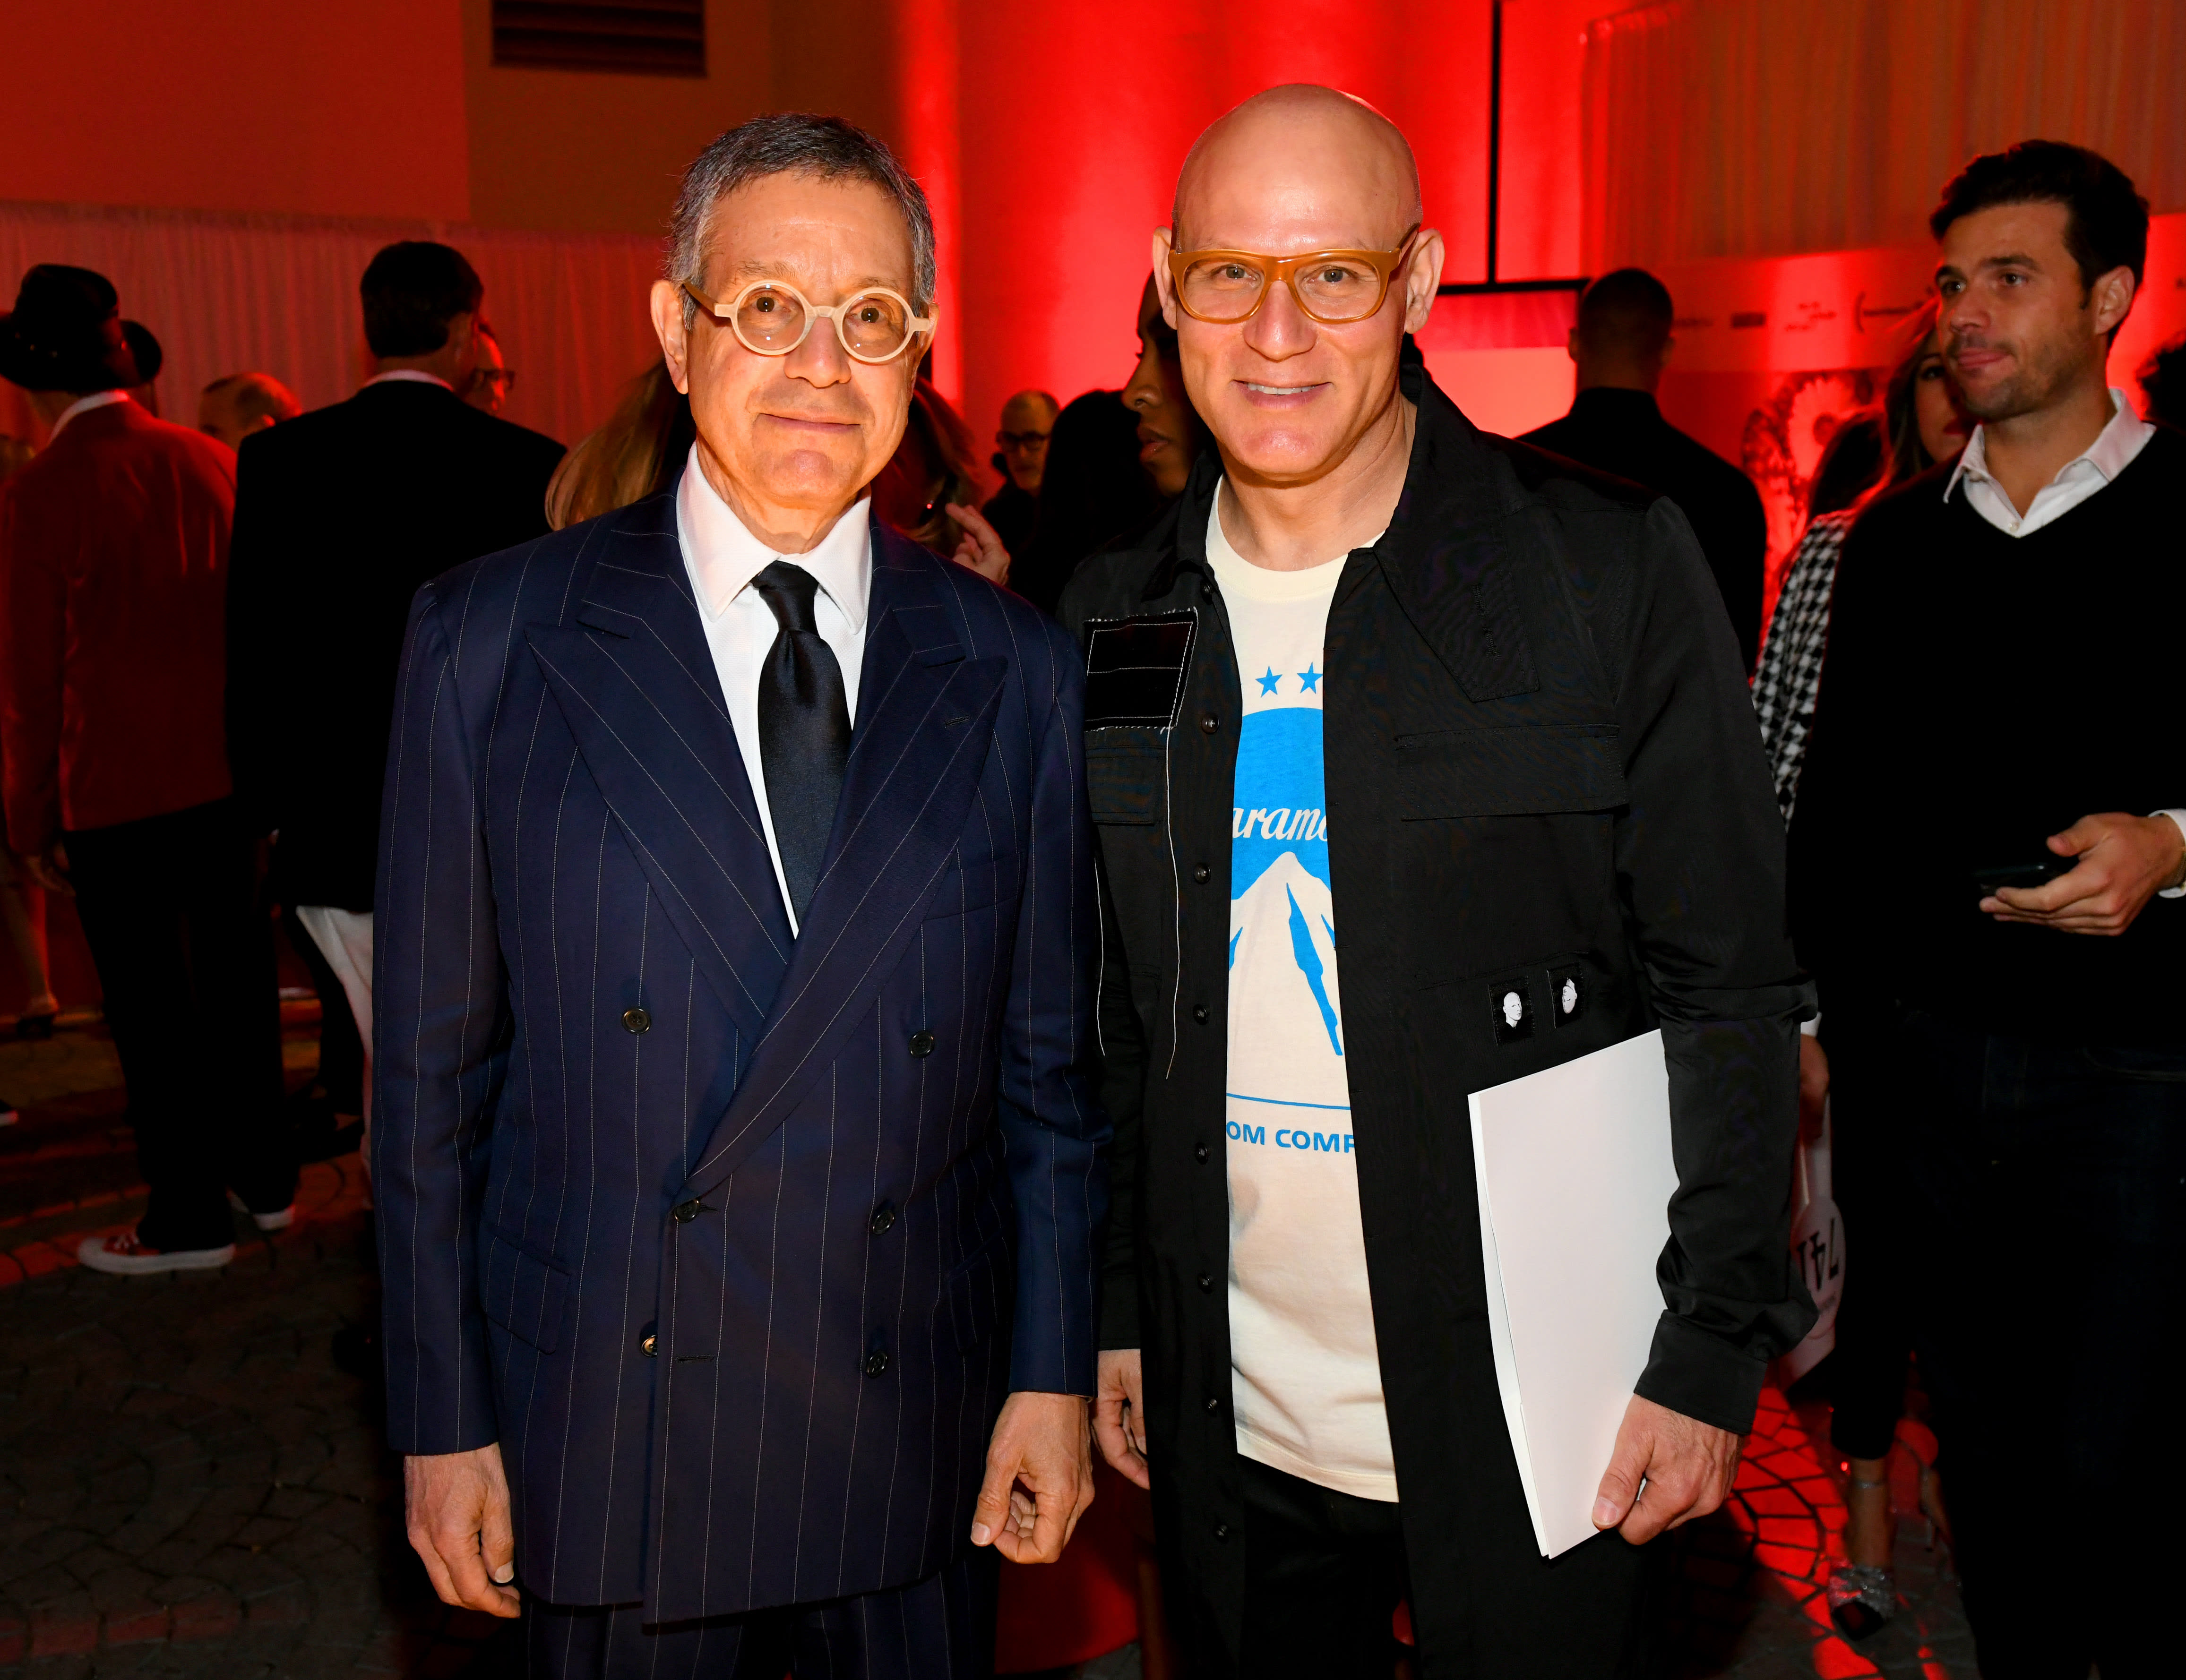 Jeffrey Deitch and Craig Robins at RED Auction hosted by Bono at the Miami Design District, 2018. Photo by World Red Eye.